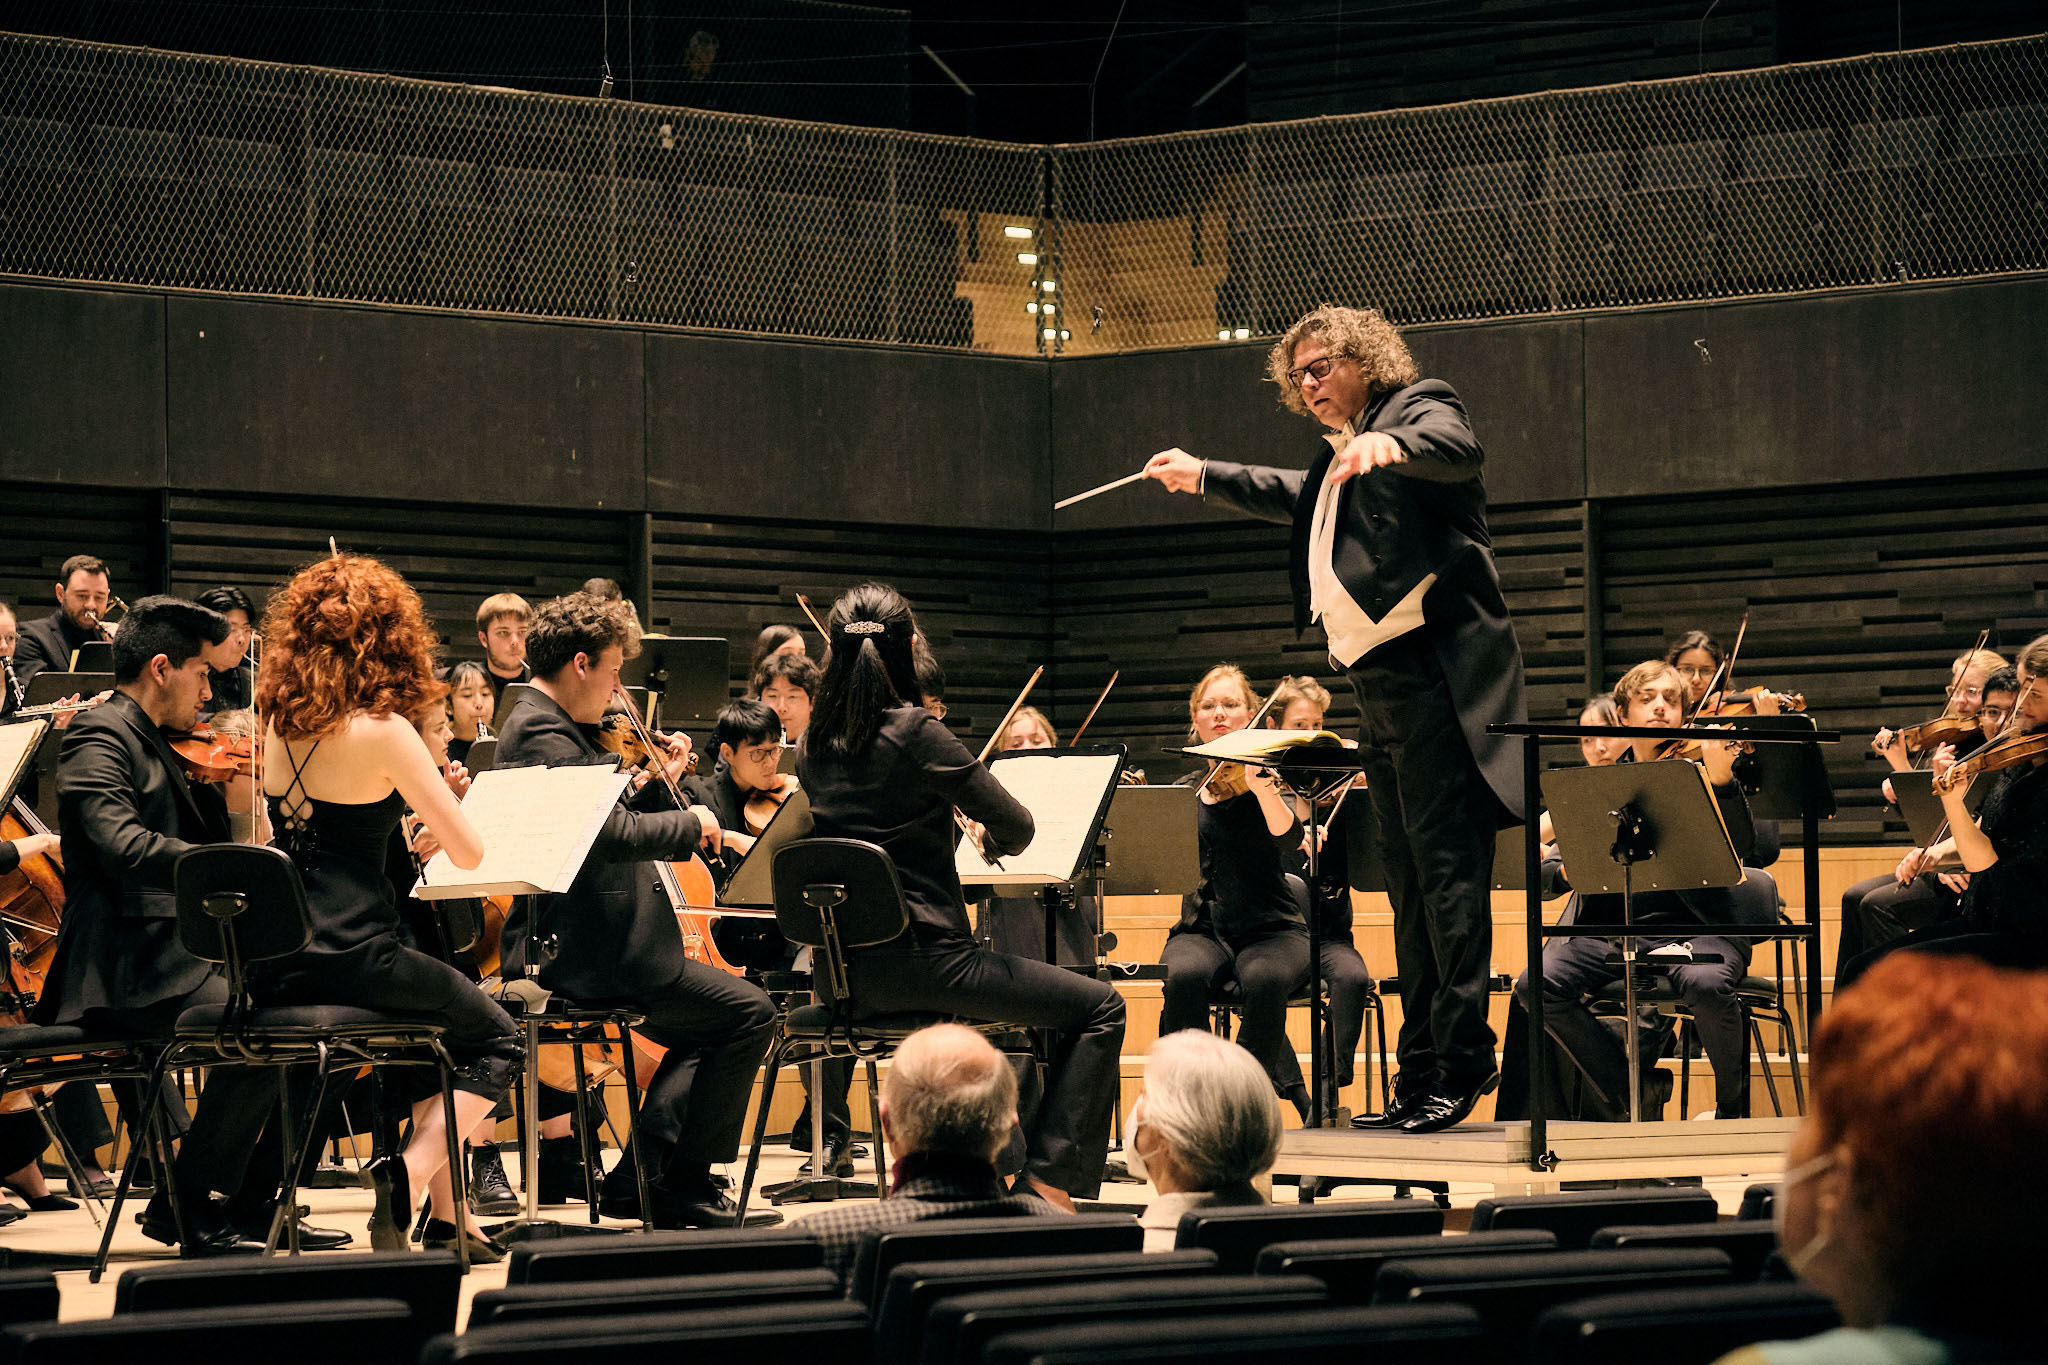 The HSO is playing on the stage of the Isarphilharmonie, the conductor has turned towards the first violins.